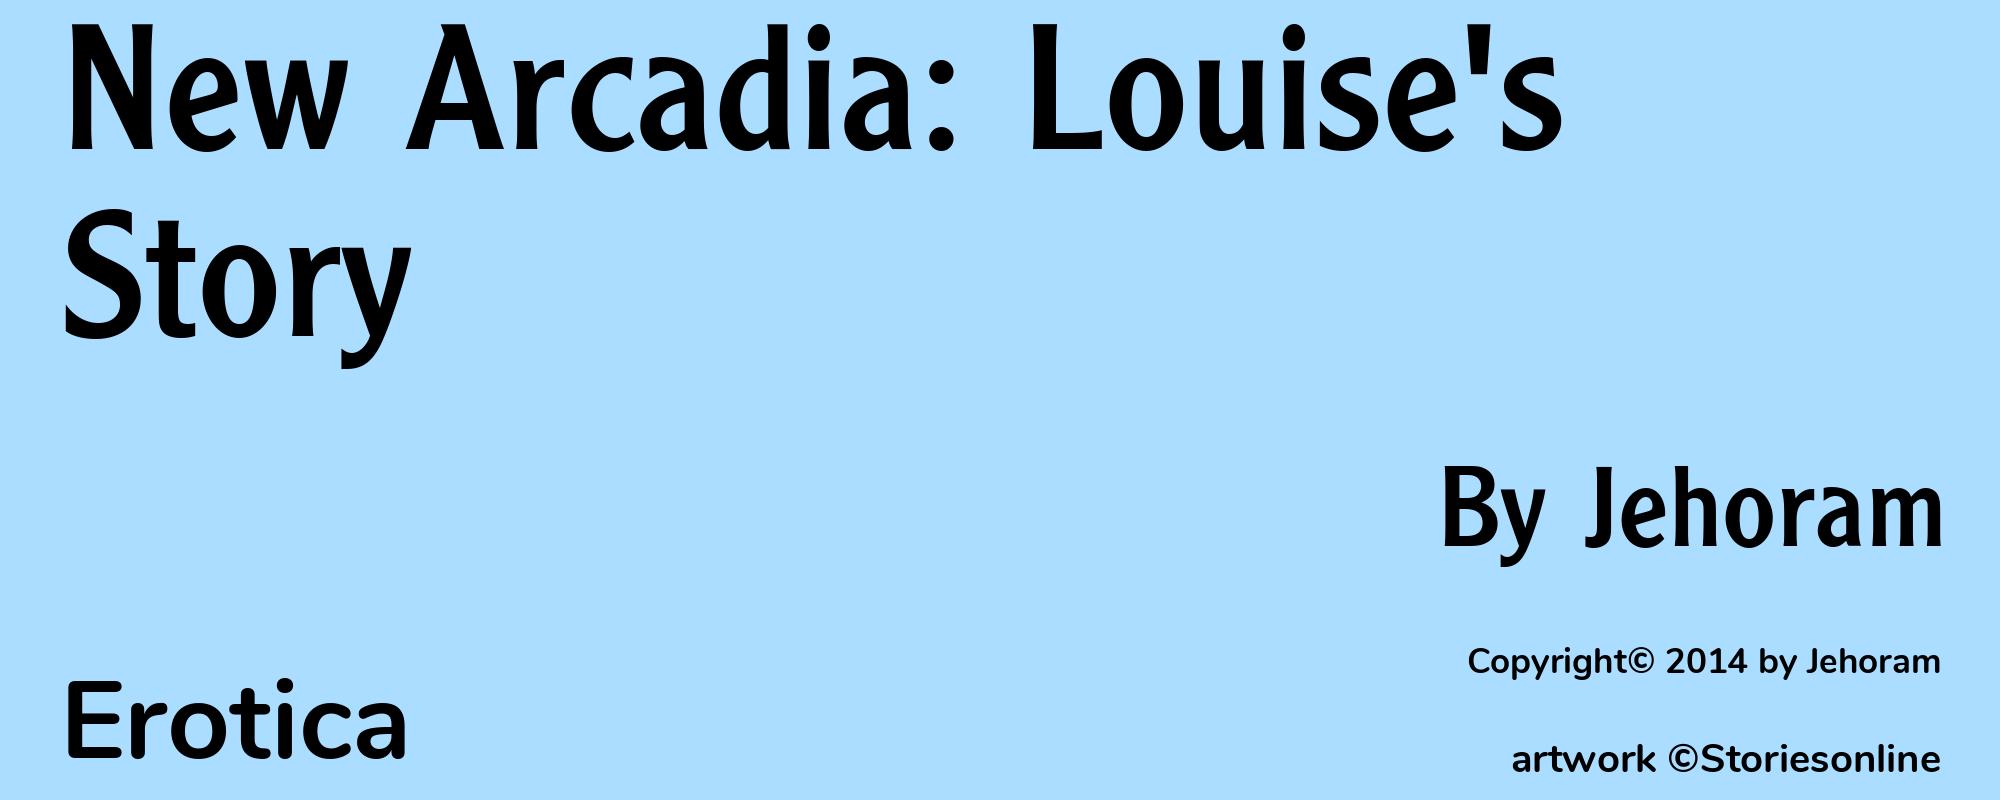 New Arcadia: Louise's Story - Cover